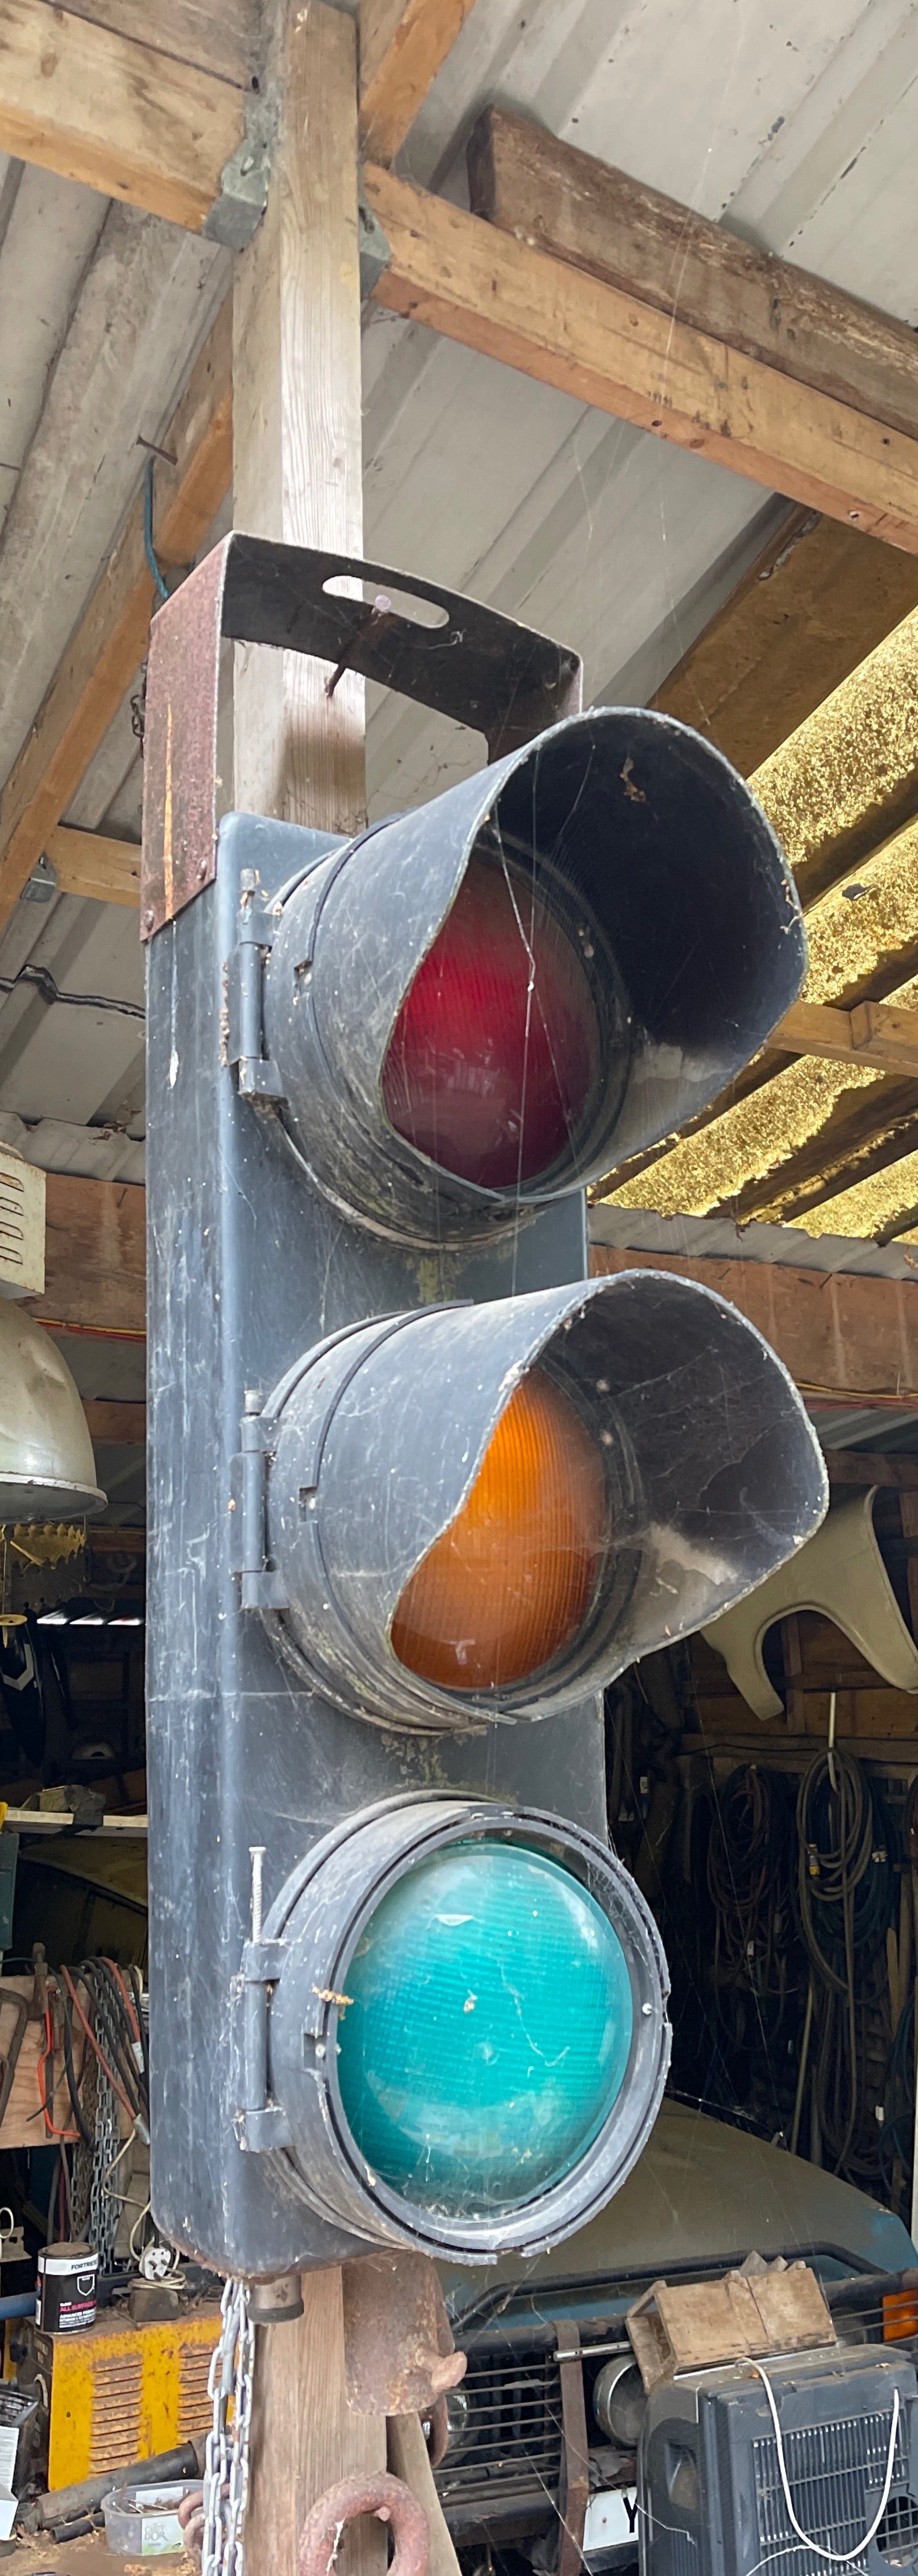 An old traffic light. - Image 2 of 2